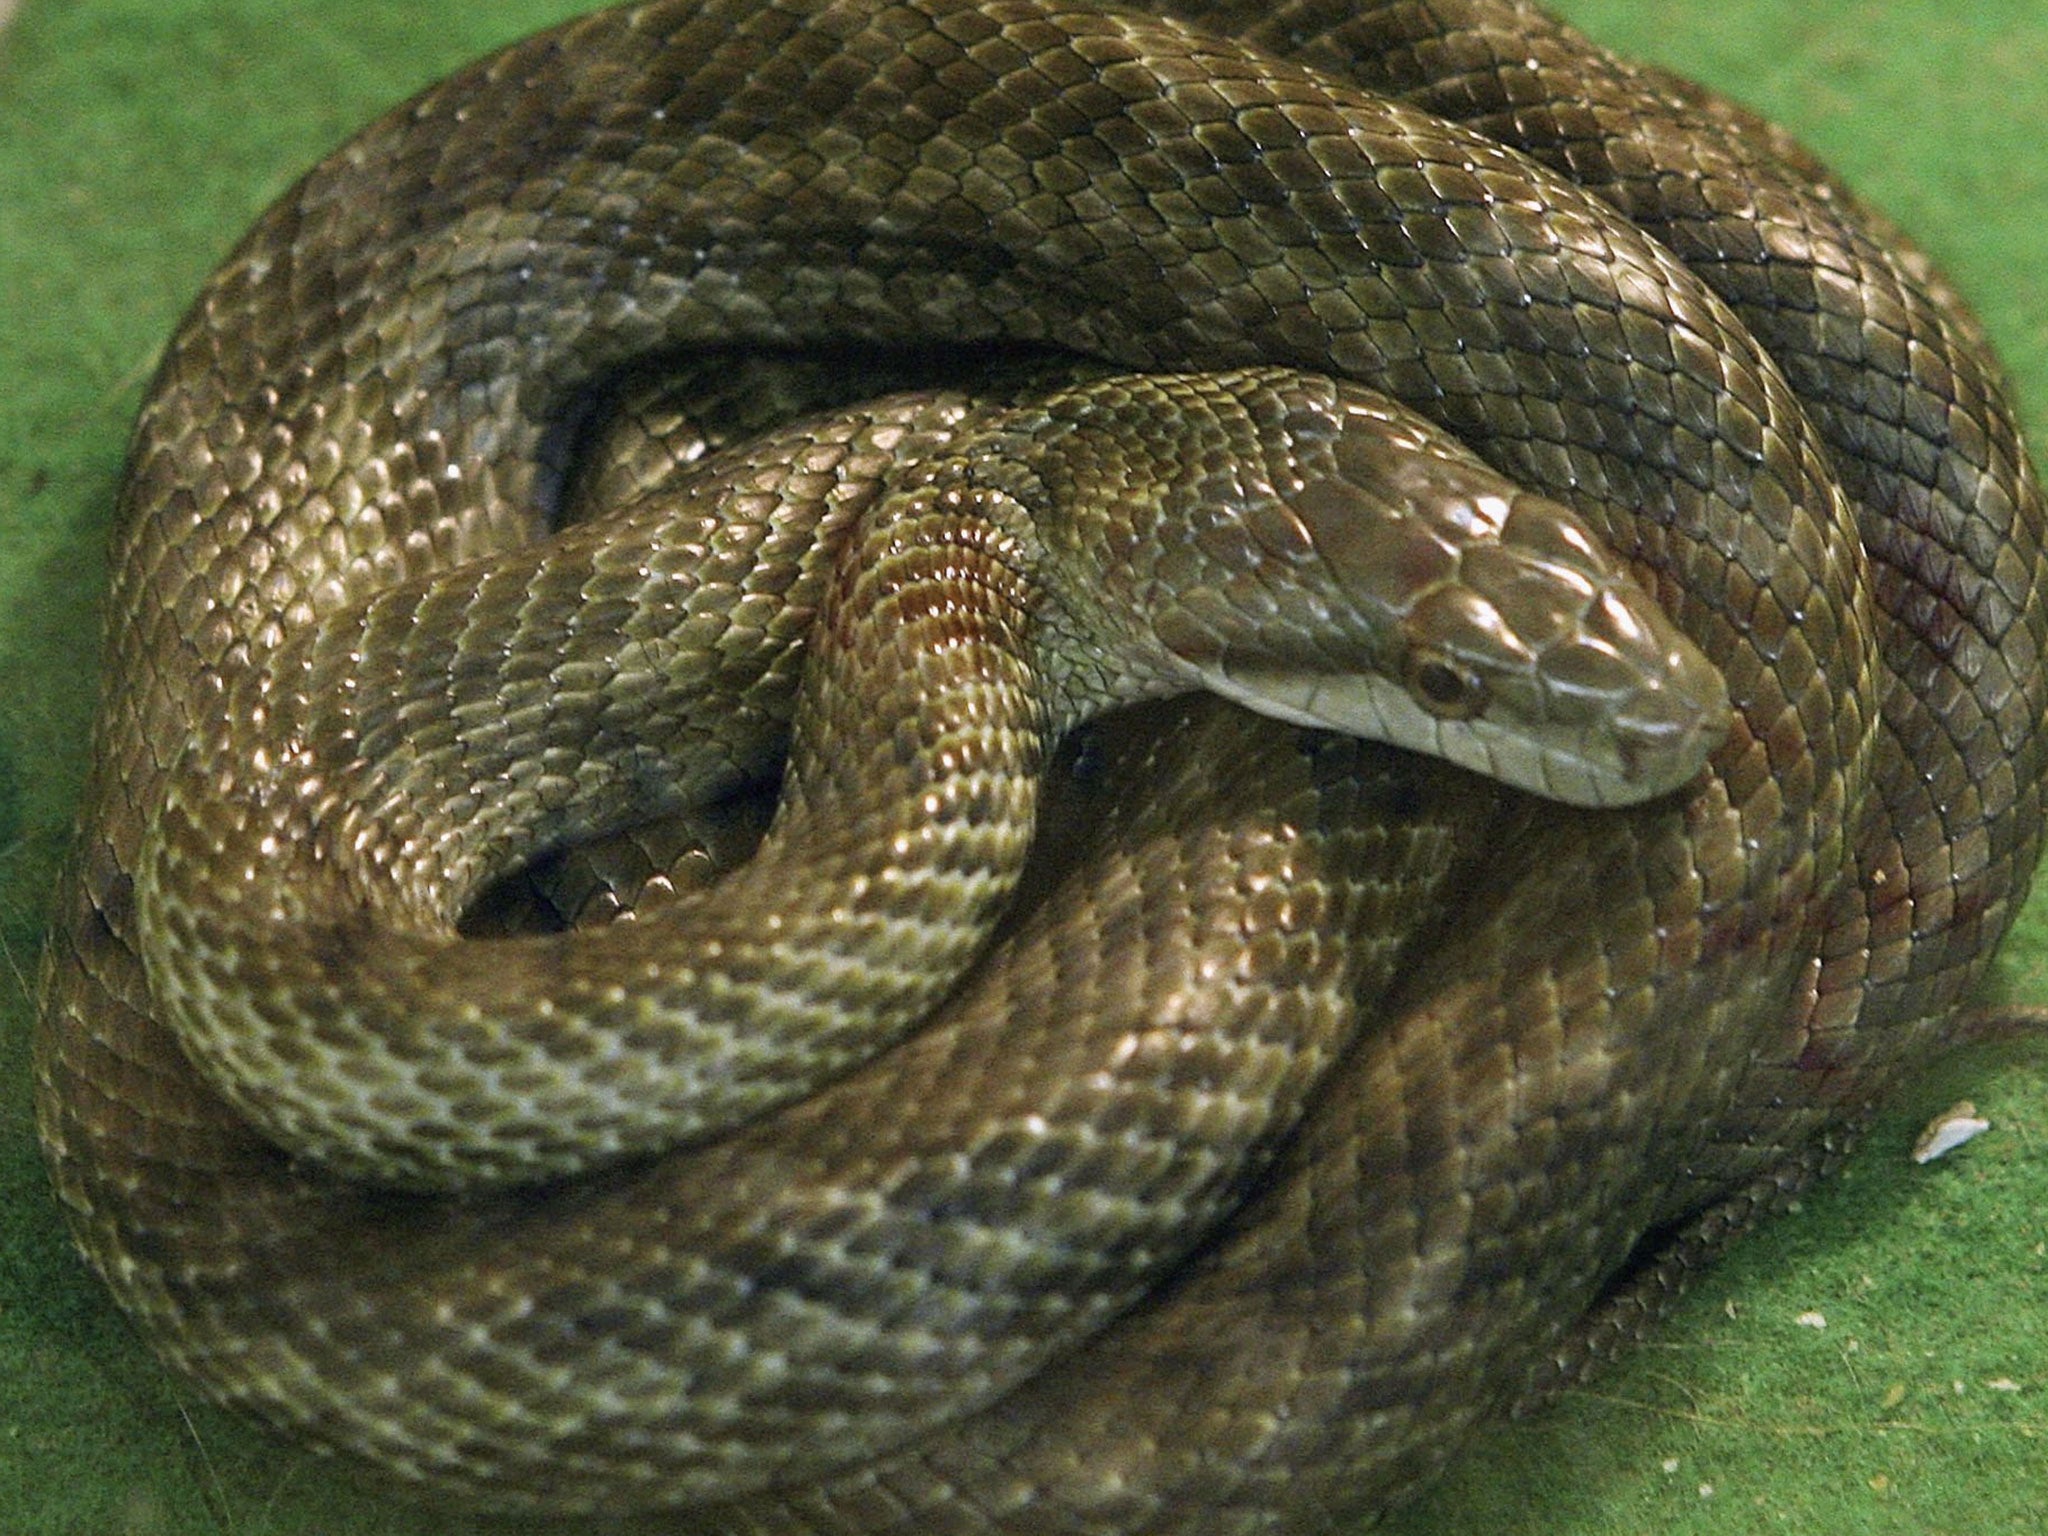 A family has said they were driven from their home by a snake infestation